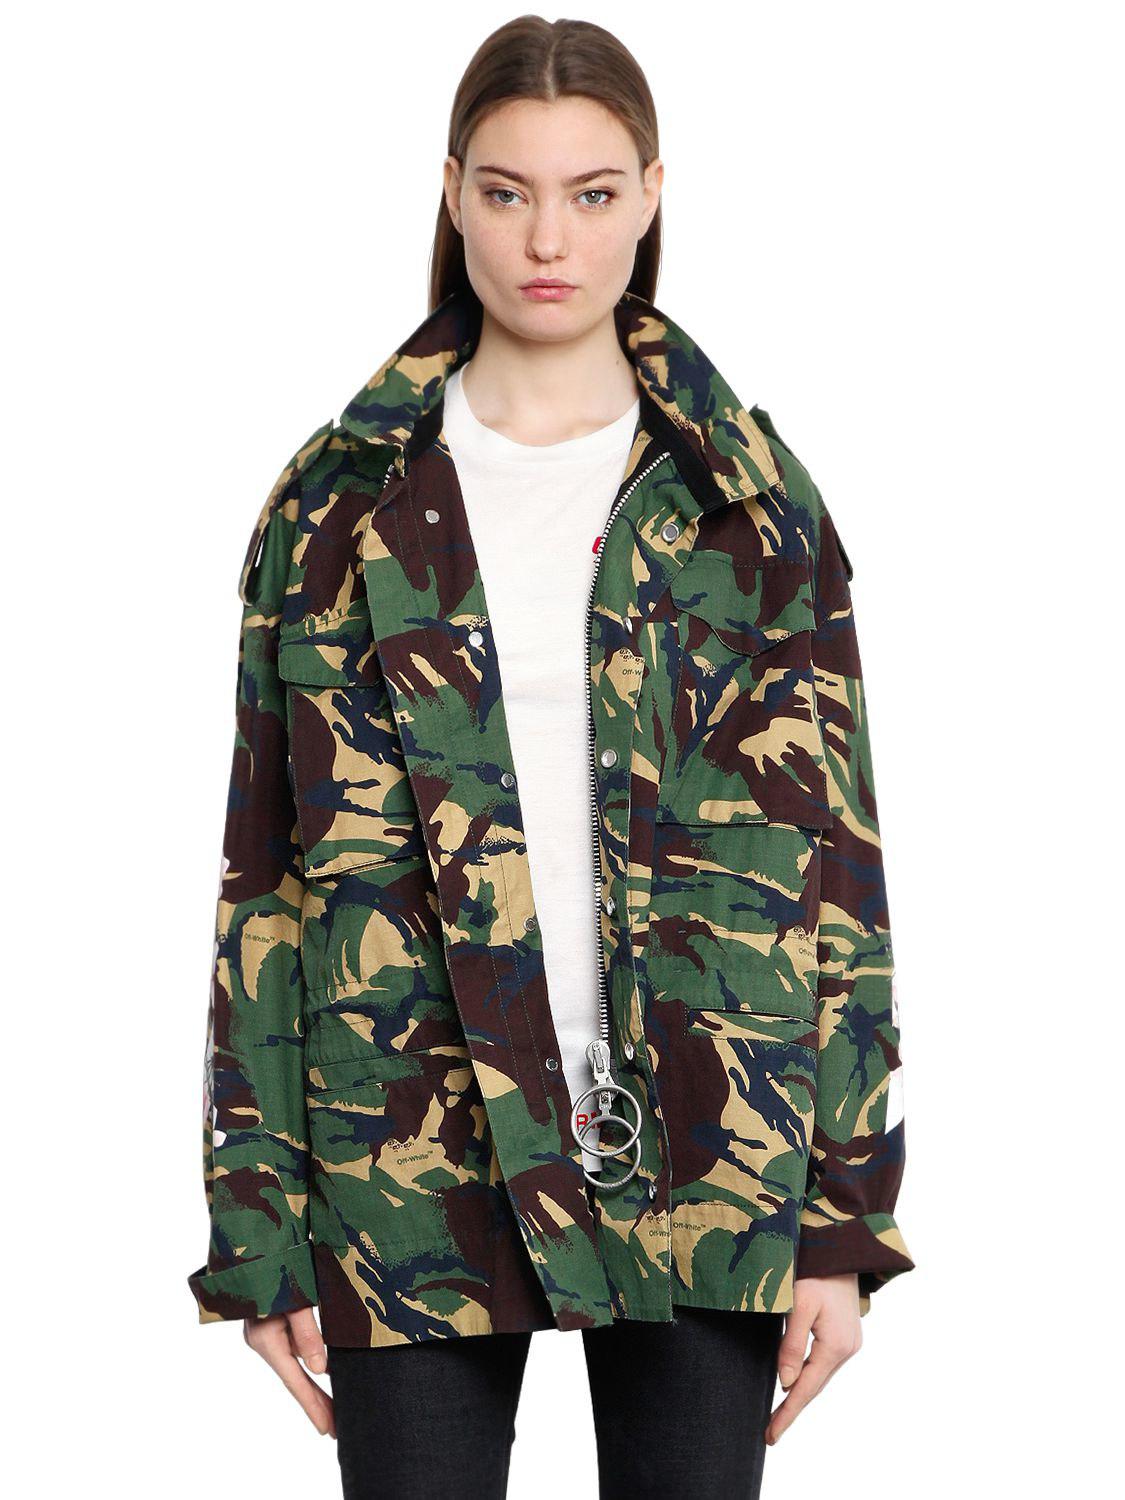 Off-White c/o Virgil Abloh M65 Camo & Cherry Blossom Field Jacket in Green  - Lyst